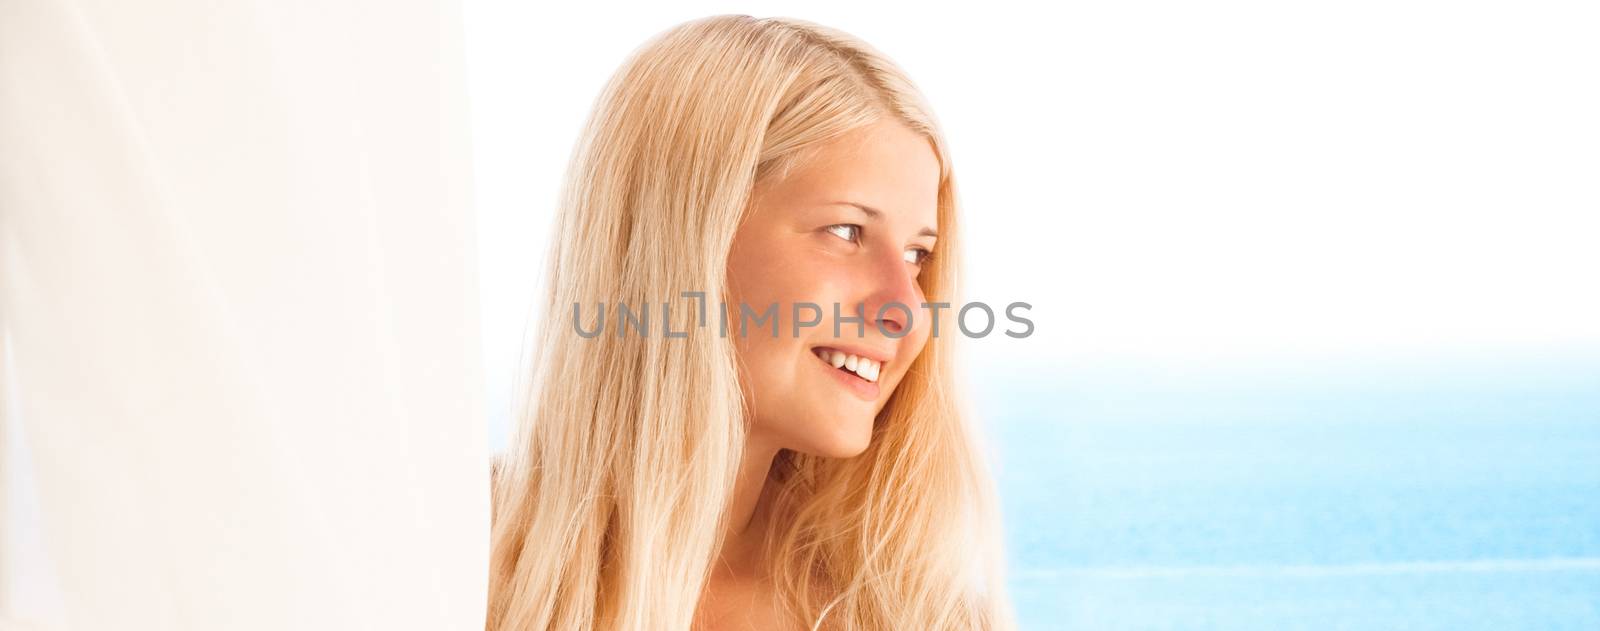 Woman with blond hair enjoying seaside and beach lifestyle in su by Anneleven